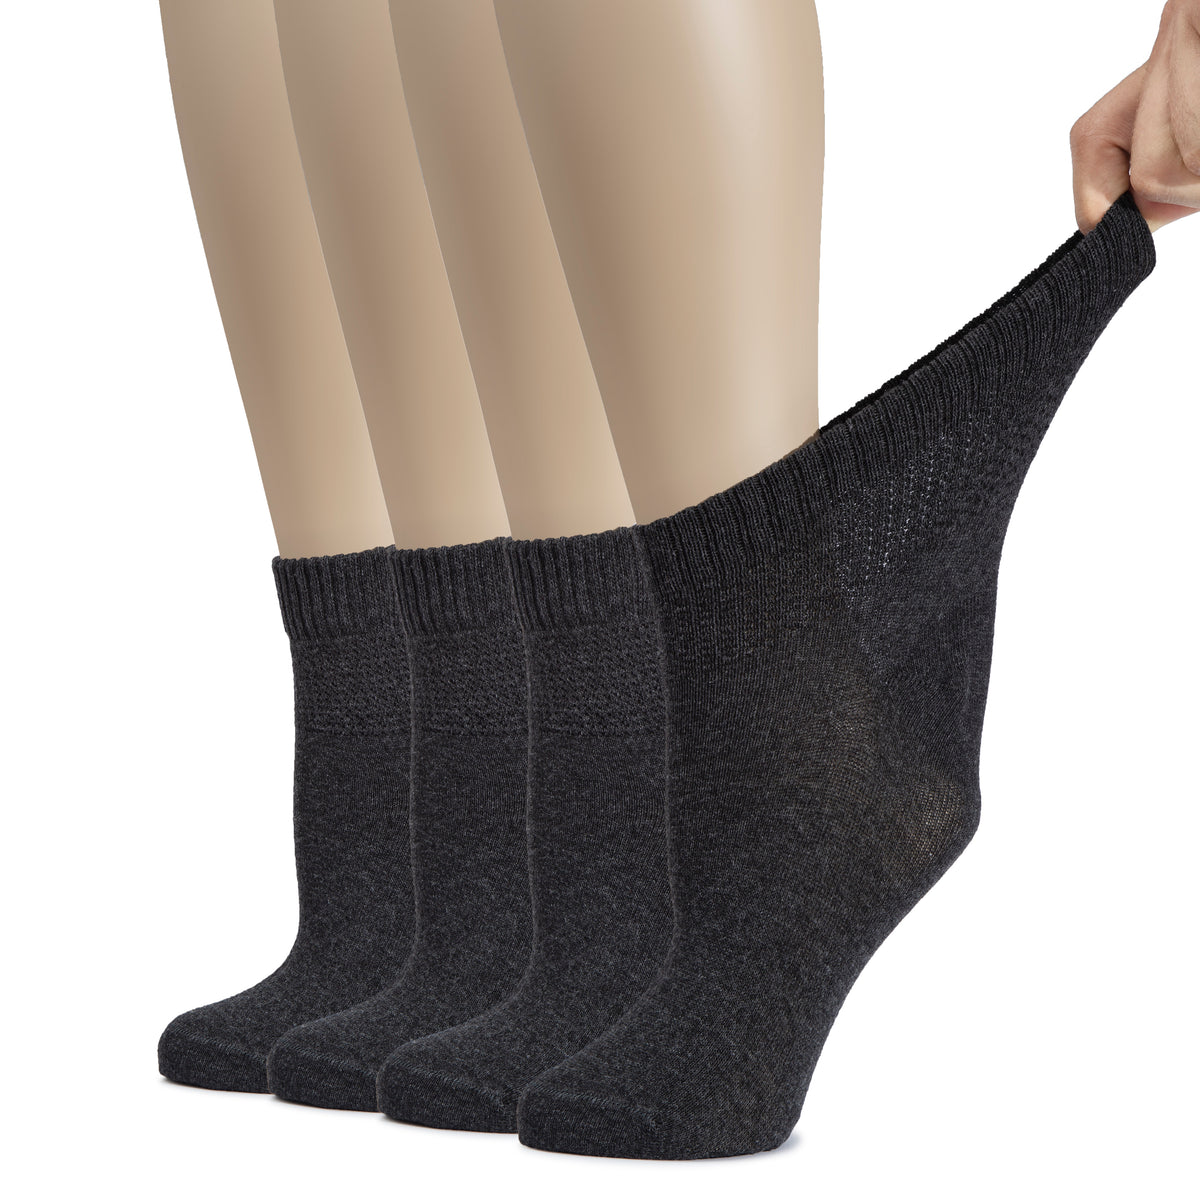 Women's Cotton Diabetic Ankle Socks are shown on a woman's feet in NavyBlue / Black socks, with one foot raised. The socks offer comfort and support for those with diabetes.